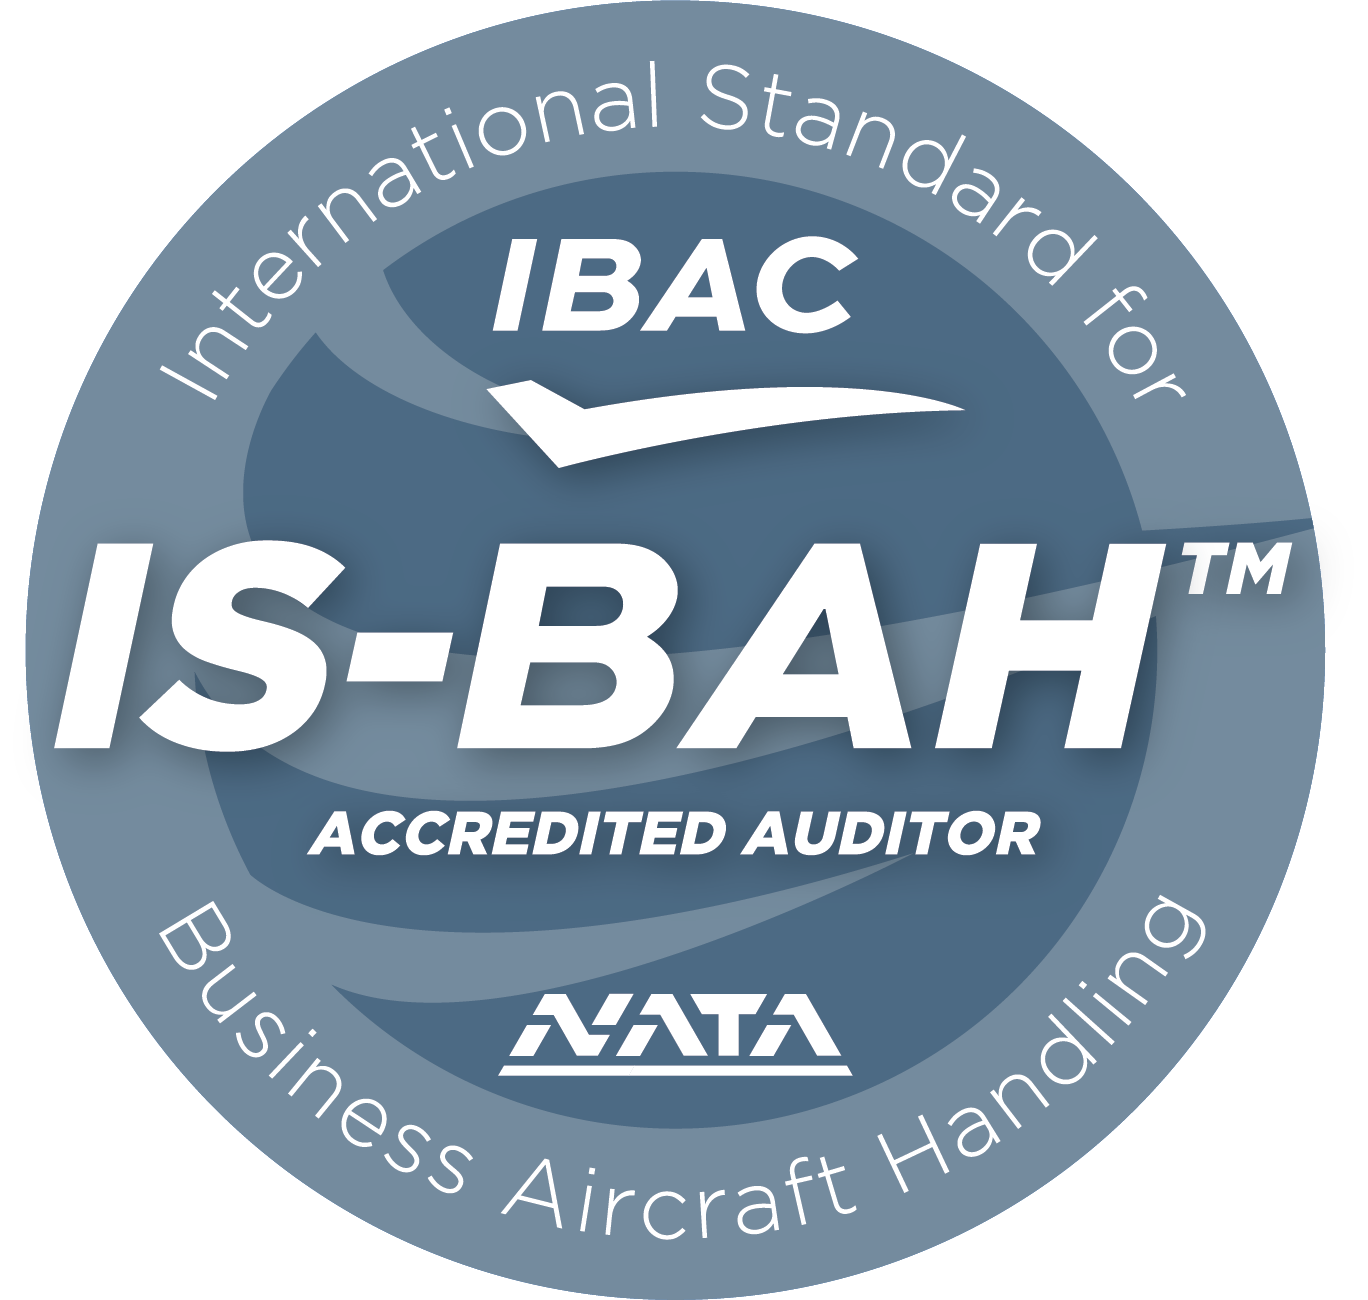 Is bah accredited auditor